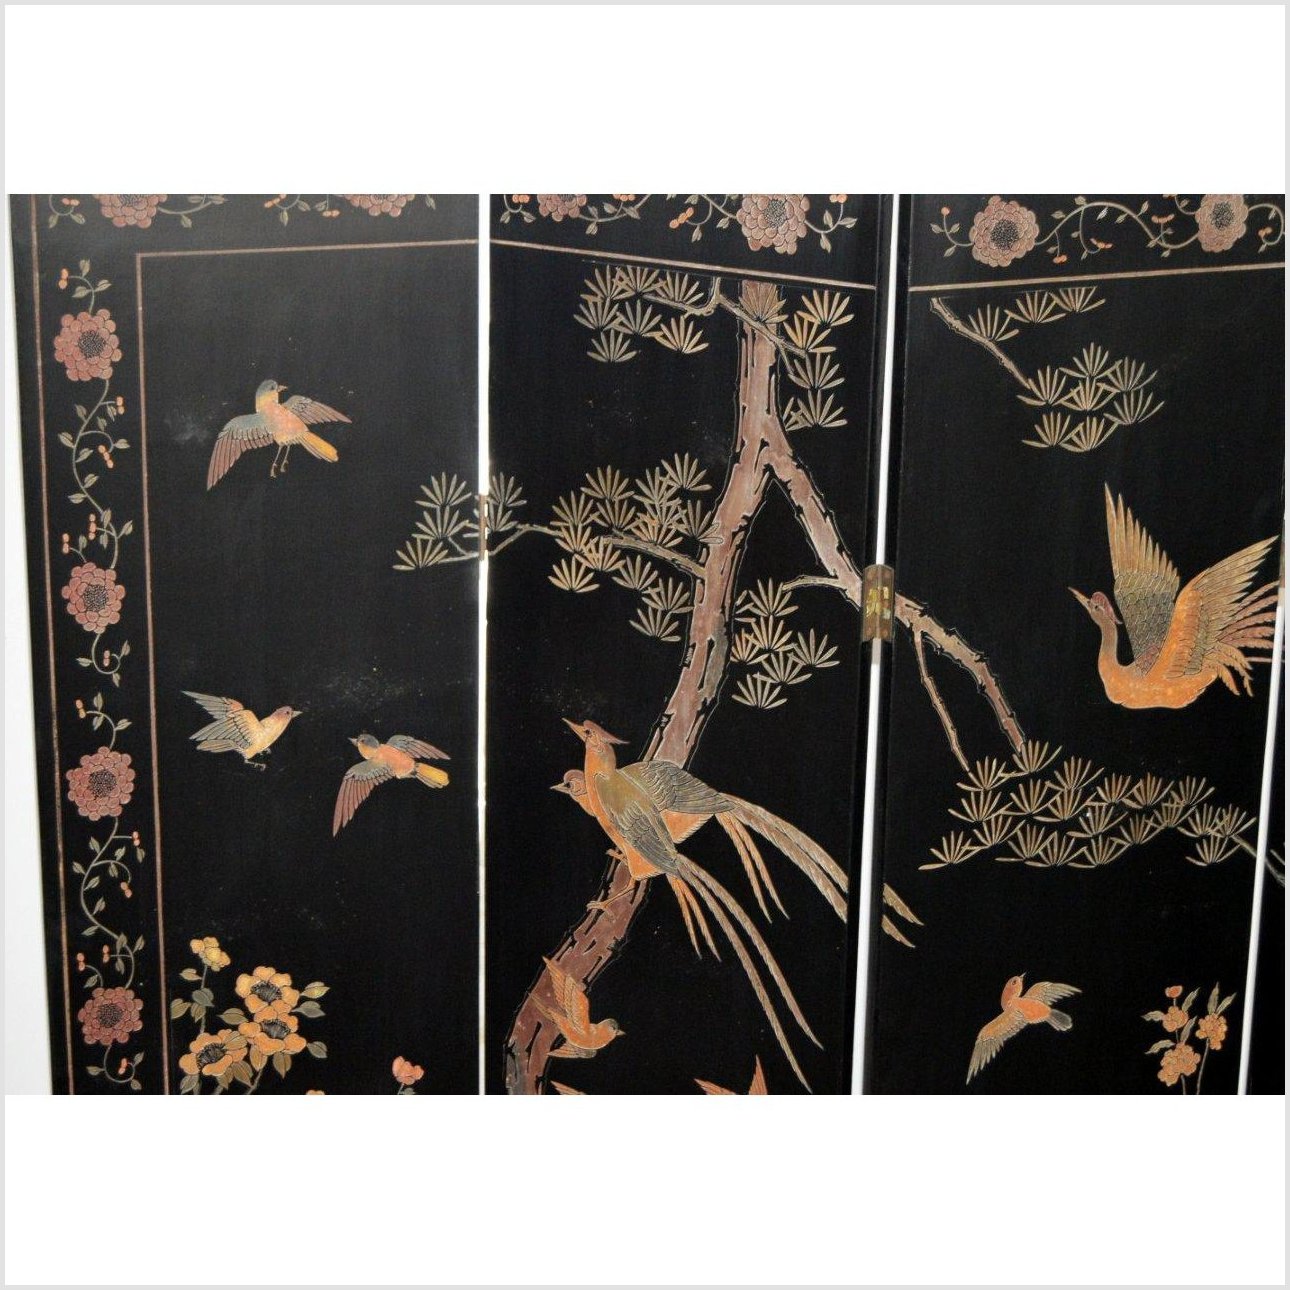 4-Panel Black Screen Designed with Trees, Birds and Flowers-YN2889-10. Asian & Chinese Furniture, Art, Antiques, Vintage Home Décor for sale at FEA Home